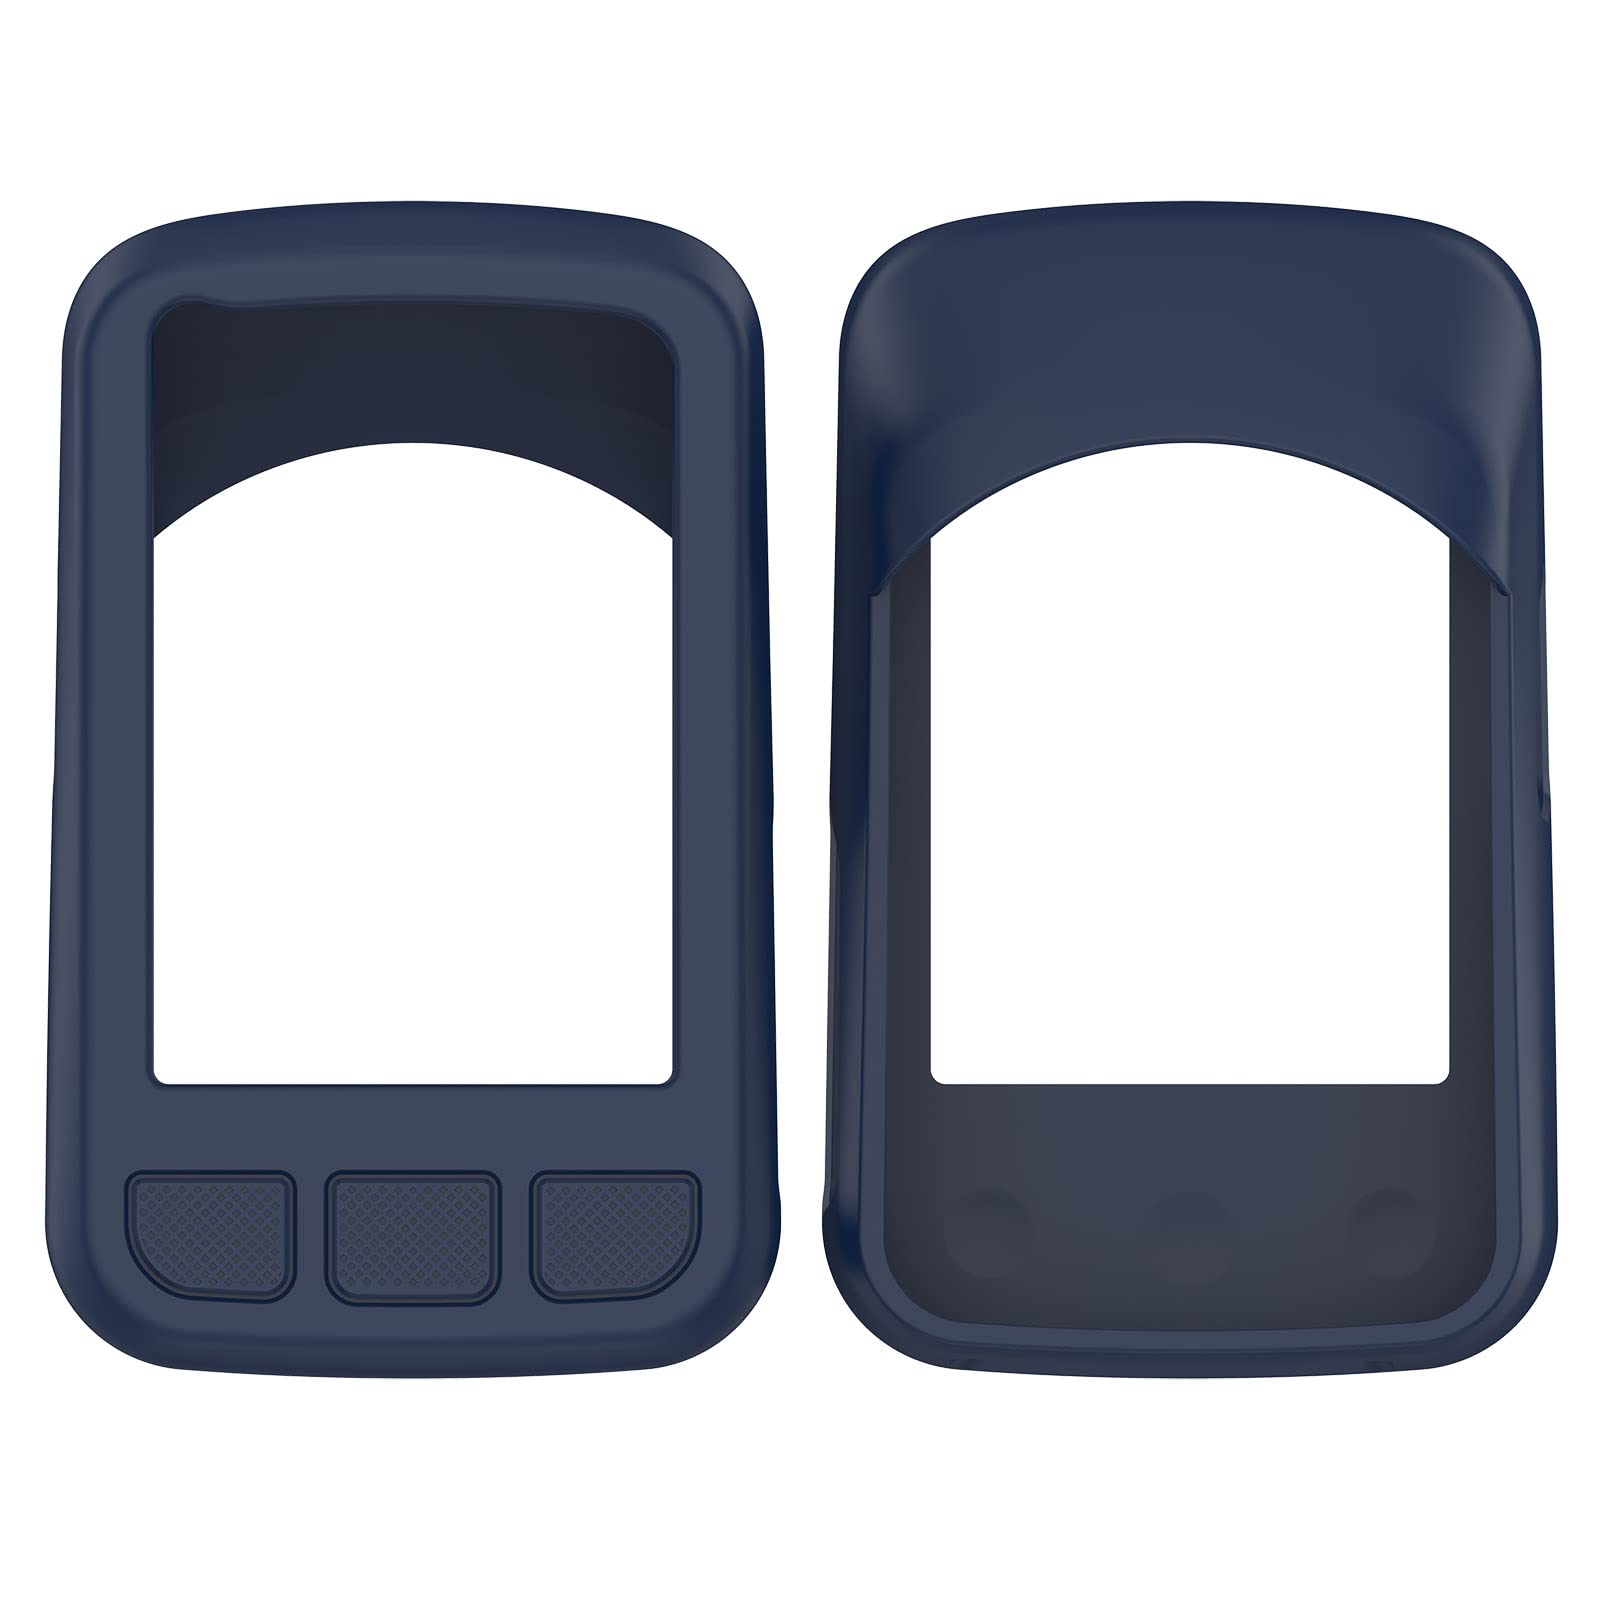 Lemspum Silicone Protective Cases Compatible with Wahoo ELEMNT Bolt V2 (WFCC5) GPS Cycling/Bike Computer Frame Protector Covers (Black&Navy&Red)